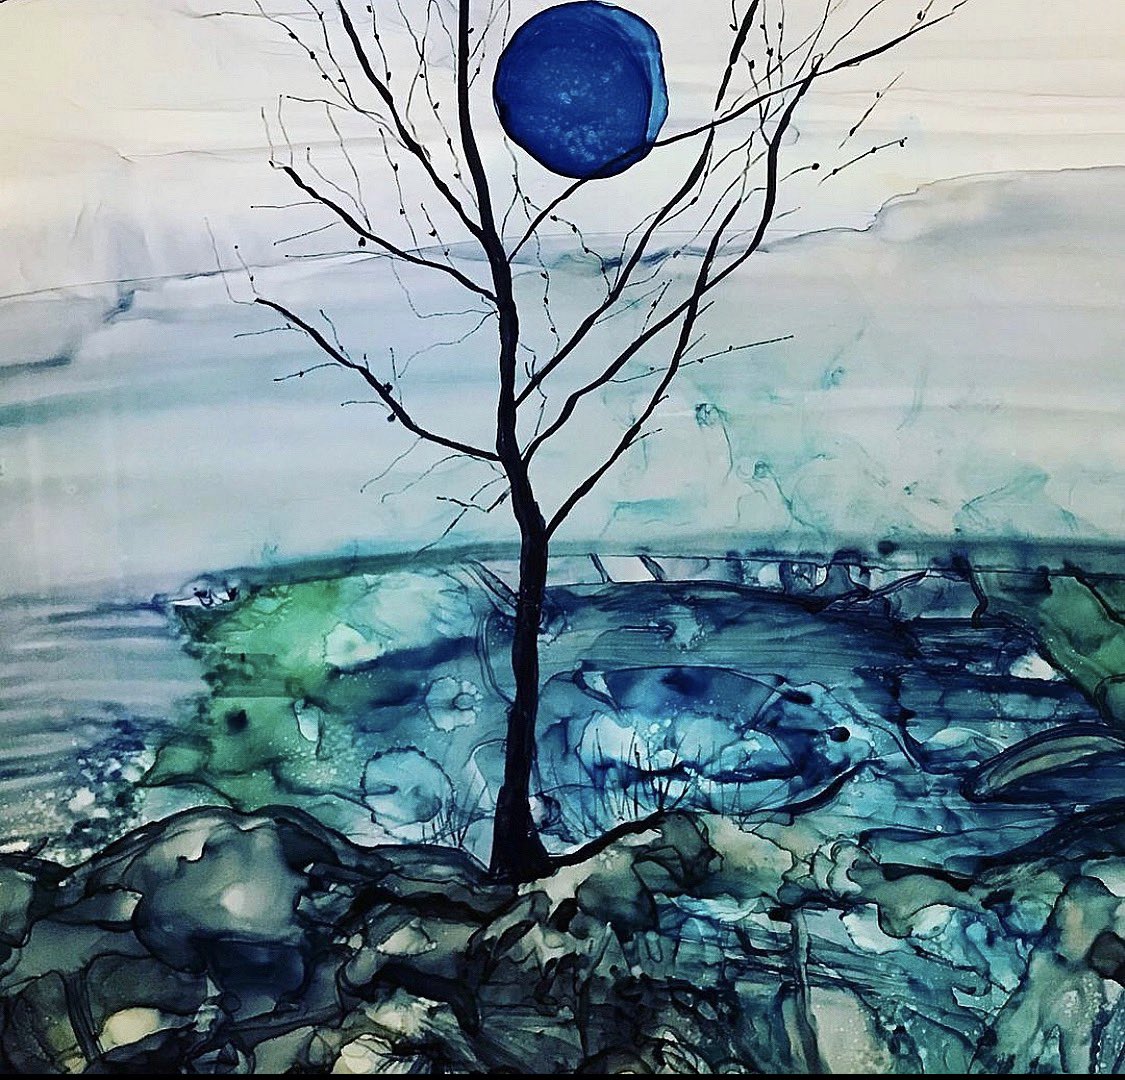 Blue Moon.  Alcohol Inks and Windsor and Newton Ink. #ArtistOnTwitter #contemporaryrealism #contemporaryart #painting